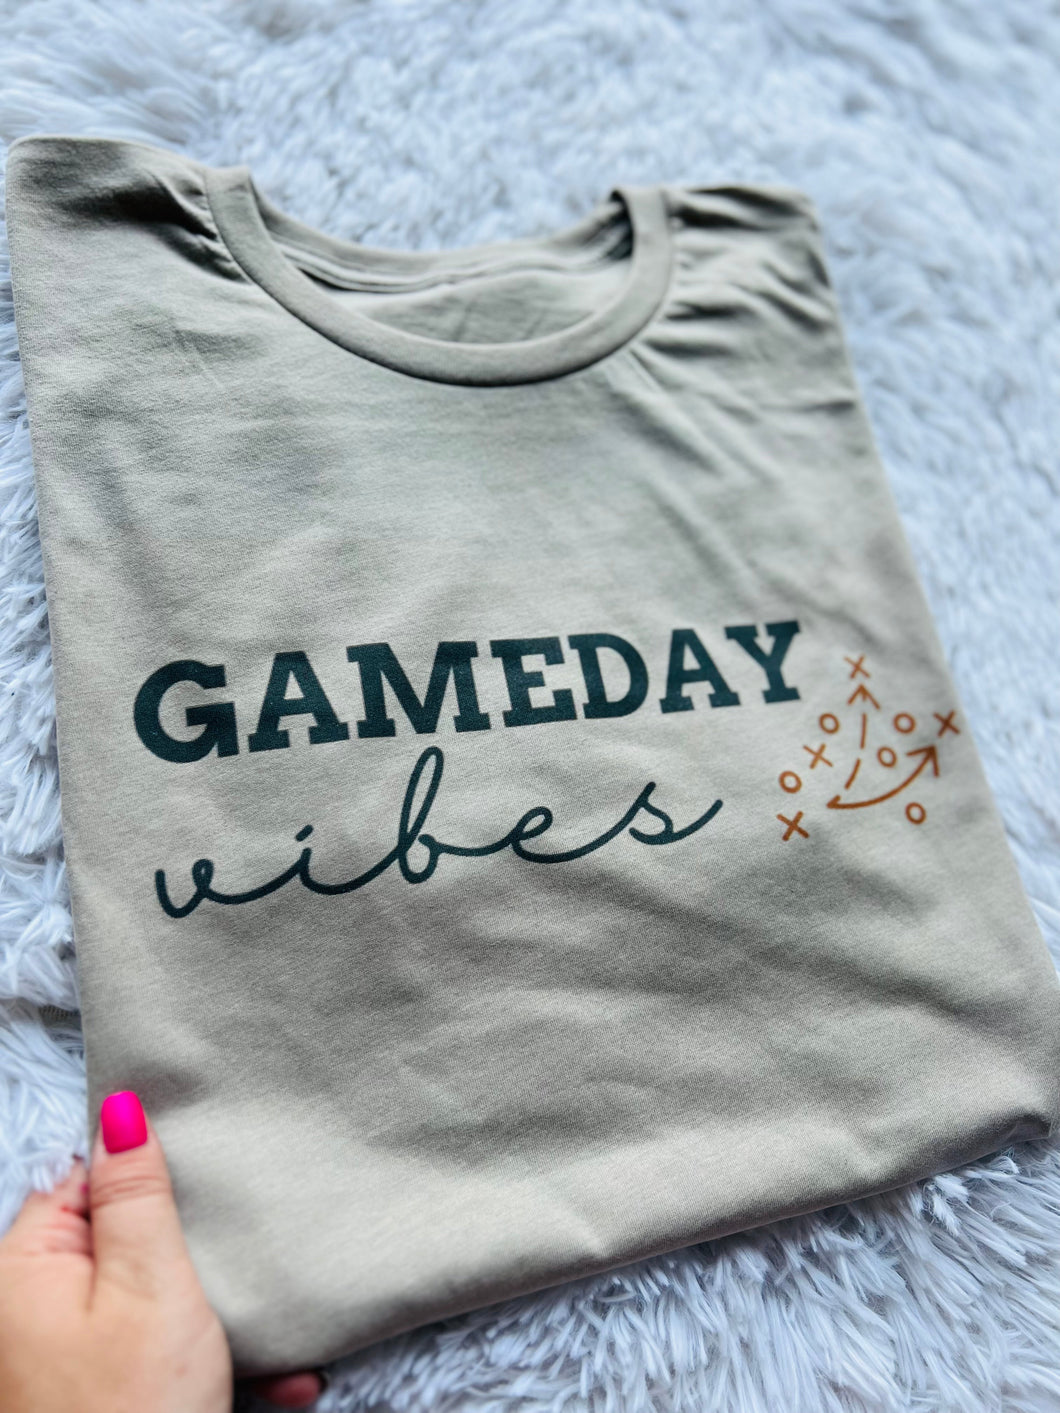 Game Day Vibes Play Graphic Tee PREORDER (SHIP DATE 8/11)